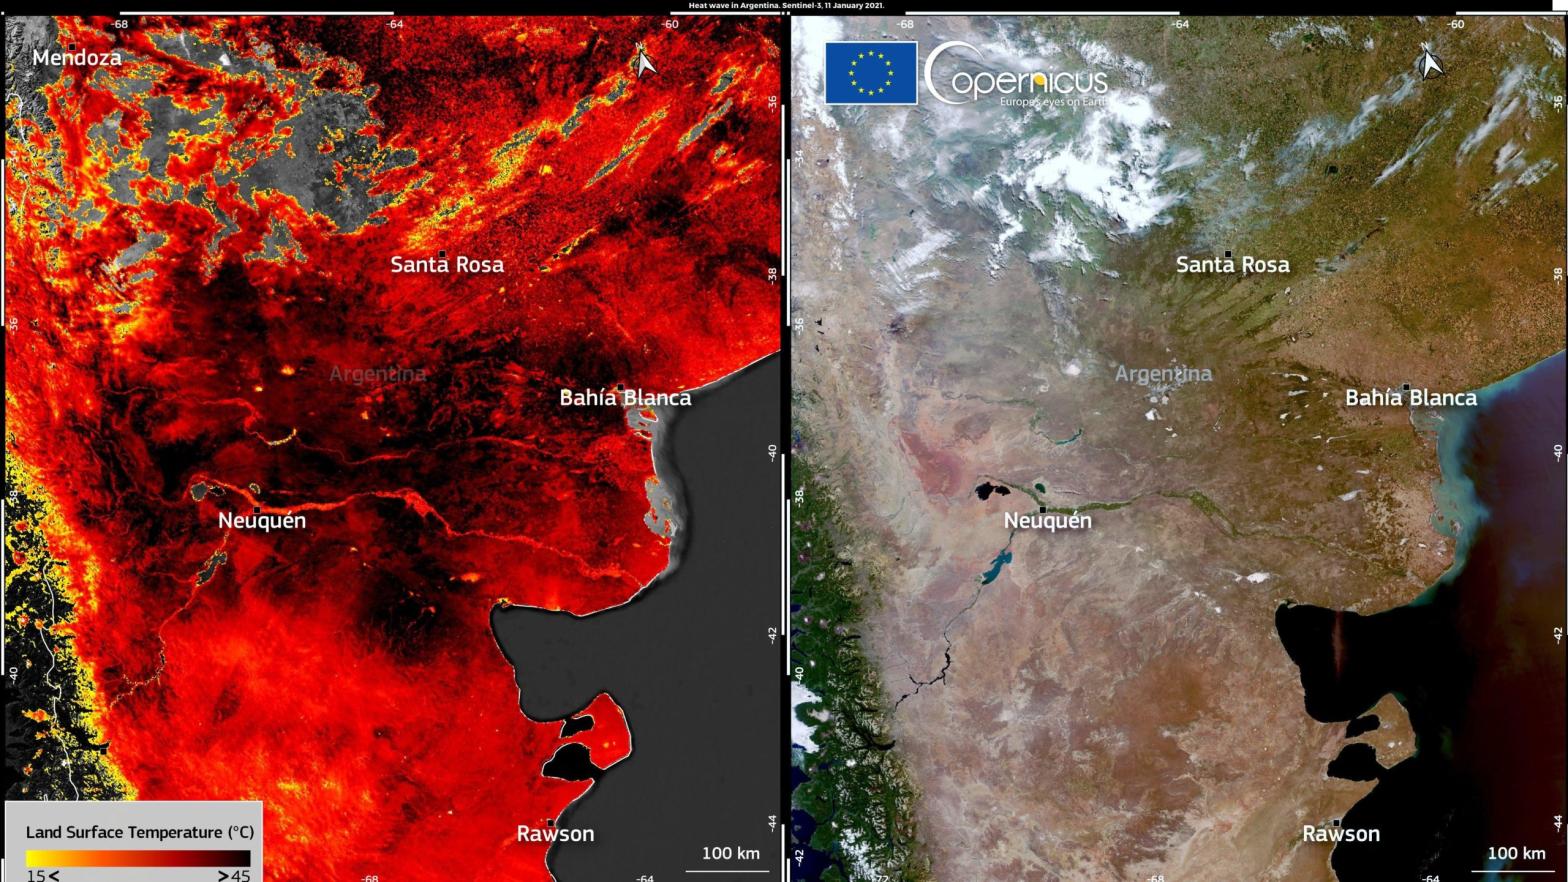 A cloudless view (right) and land surface temperature (left) of southern Argentina. (Image: European Union, Copernicus Sentinel-3)